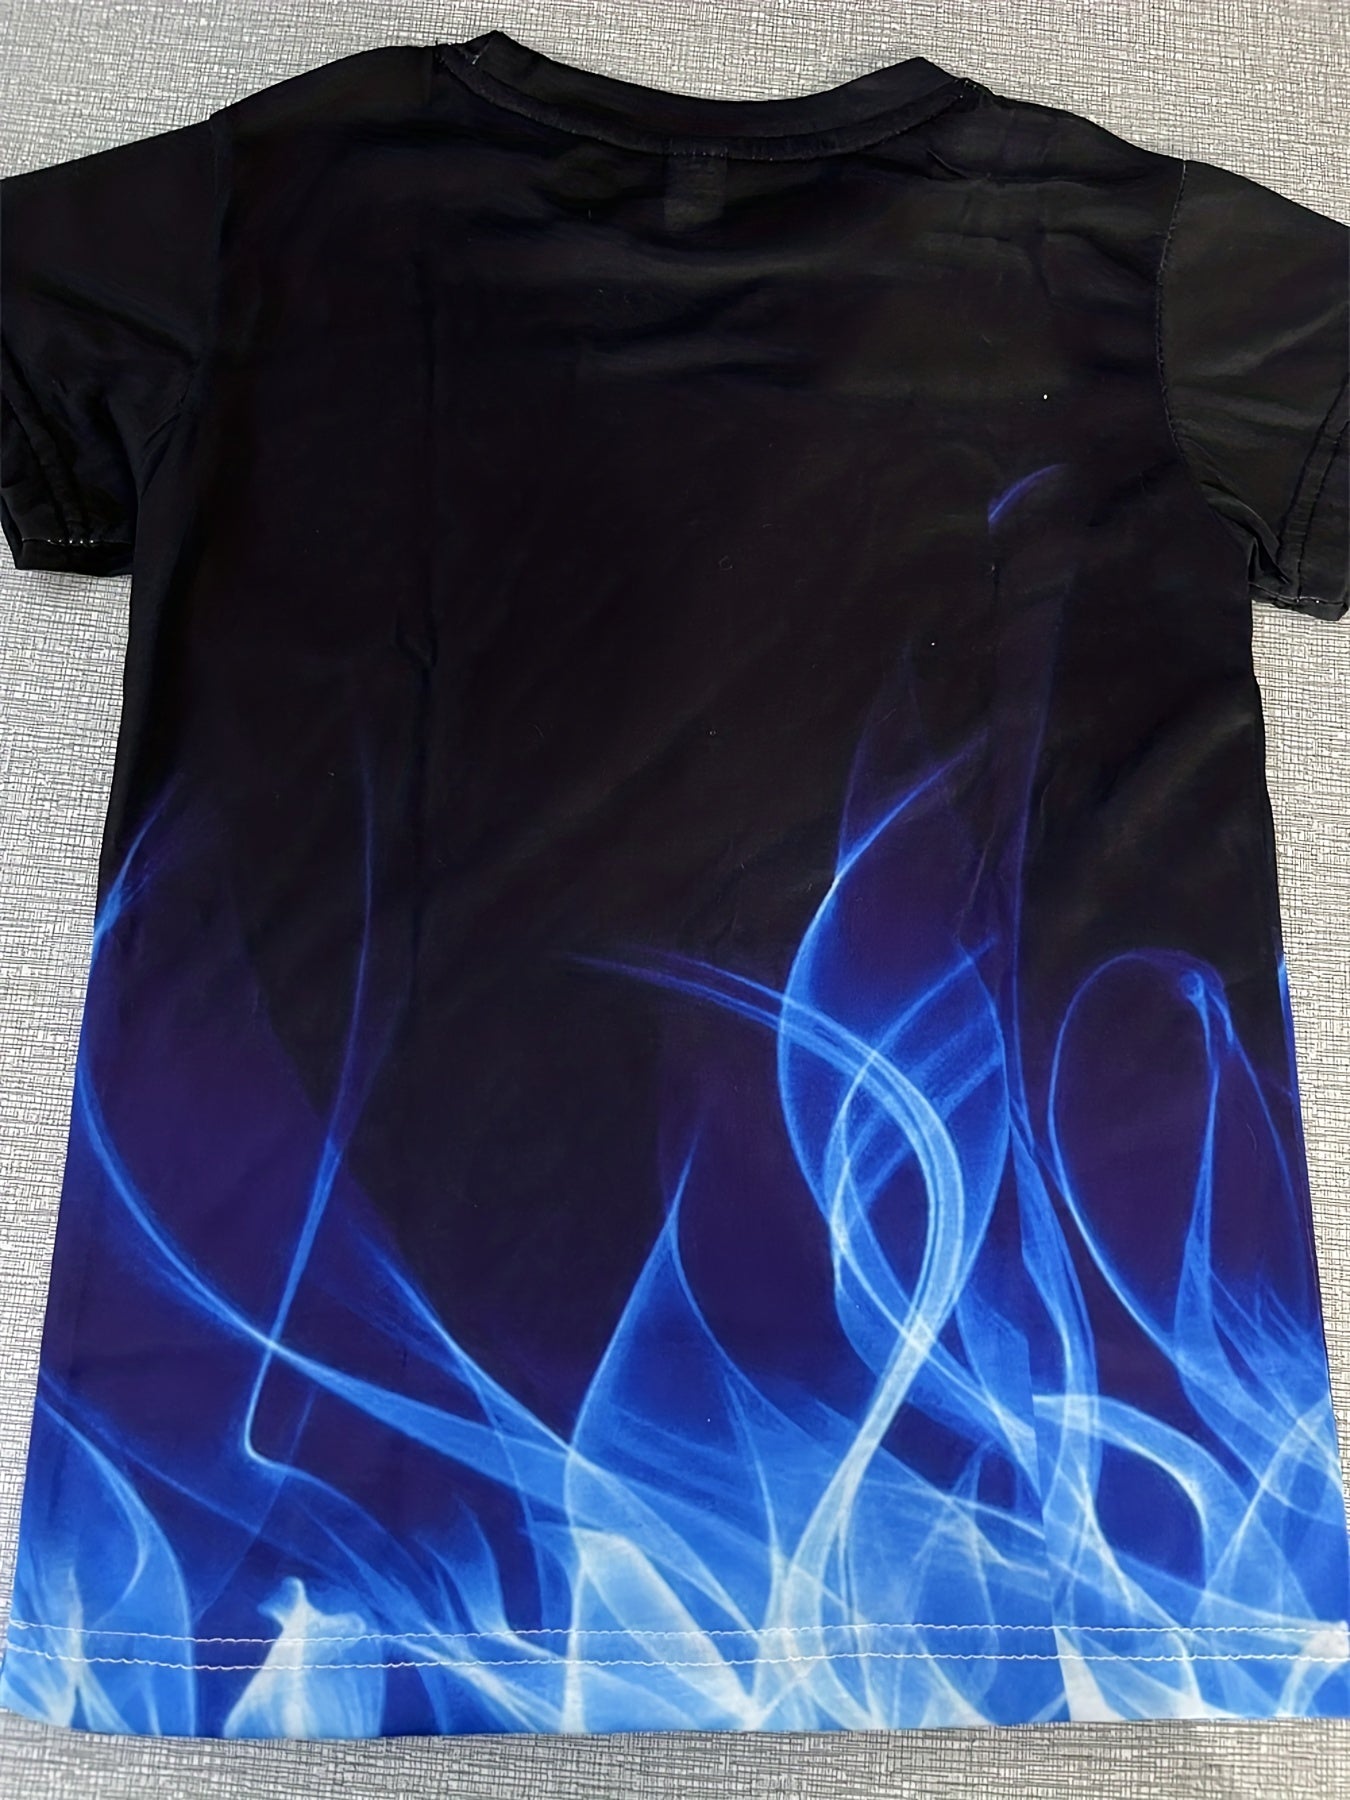 Boys' Blue Flame Graphic T-Shirt - 3D Digital Print, Active & Stretchy Short Sleeve Tee For Summer Outdoor Fun